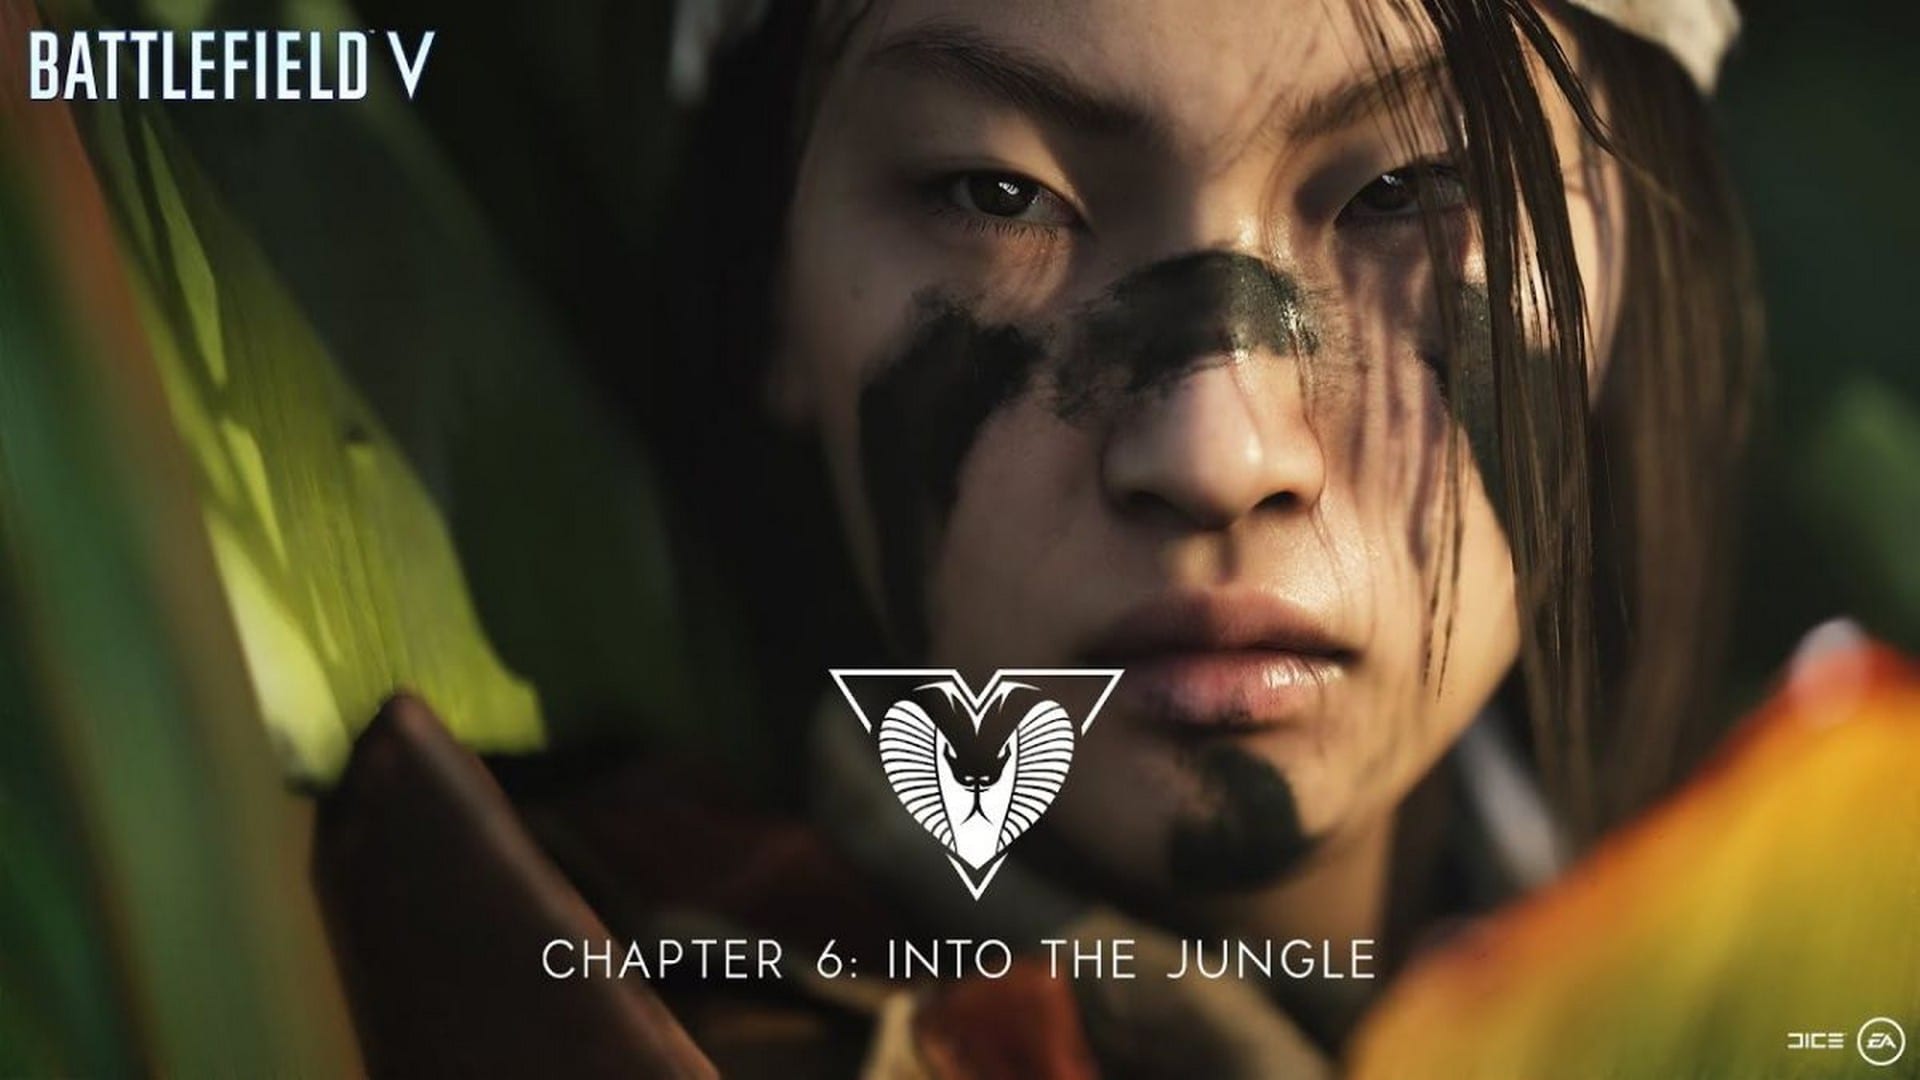 Battlefield V Chapter 6: Into the Jungle Launches February 6